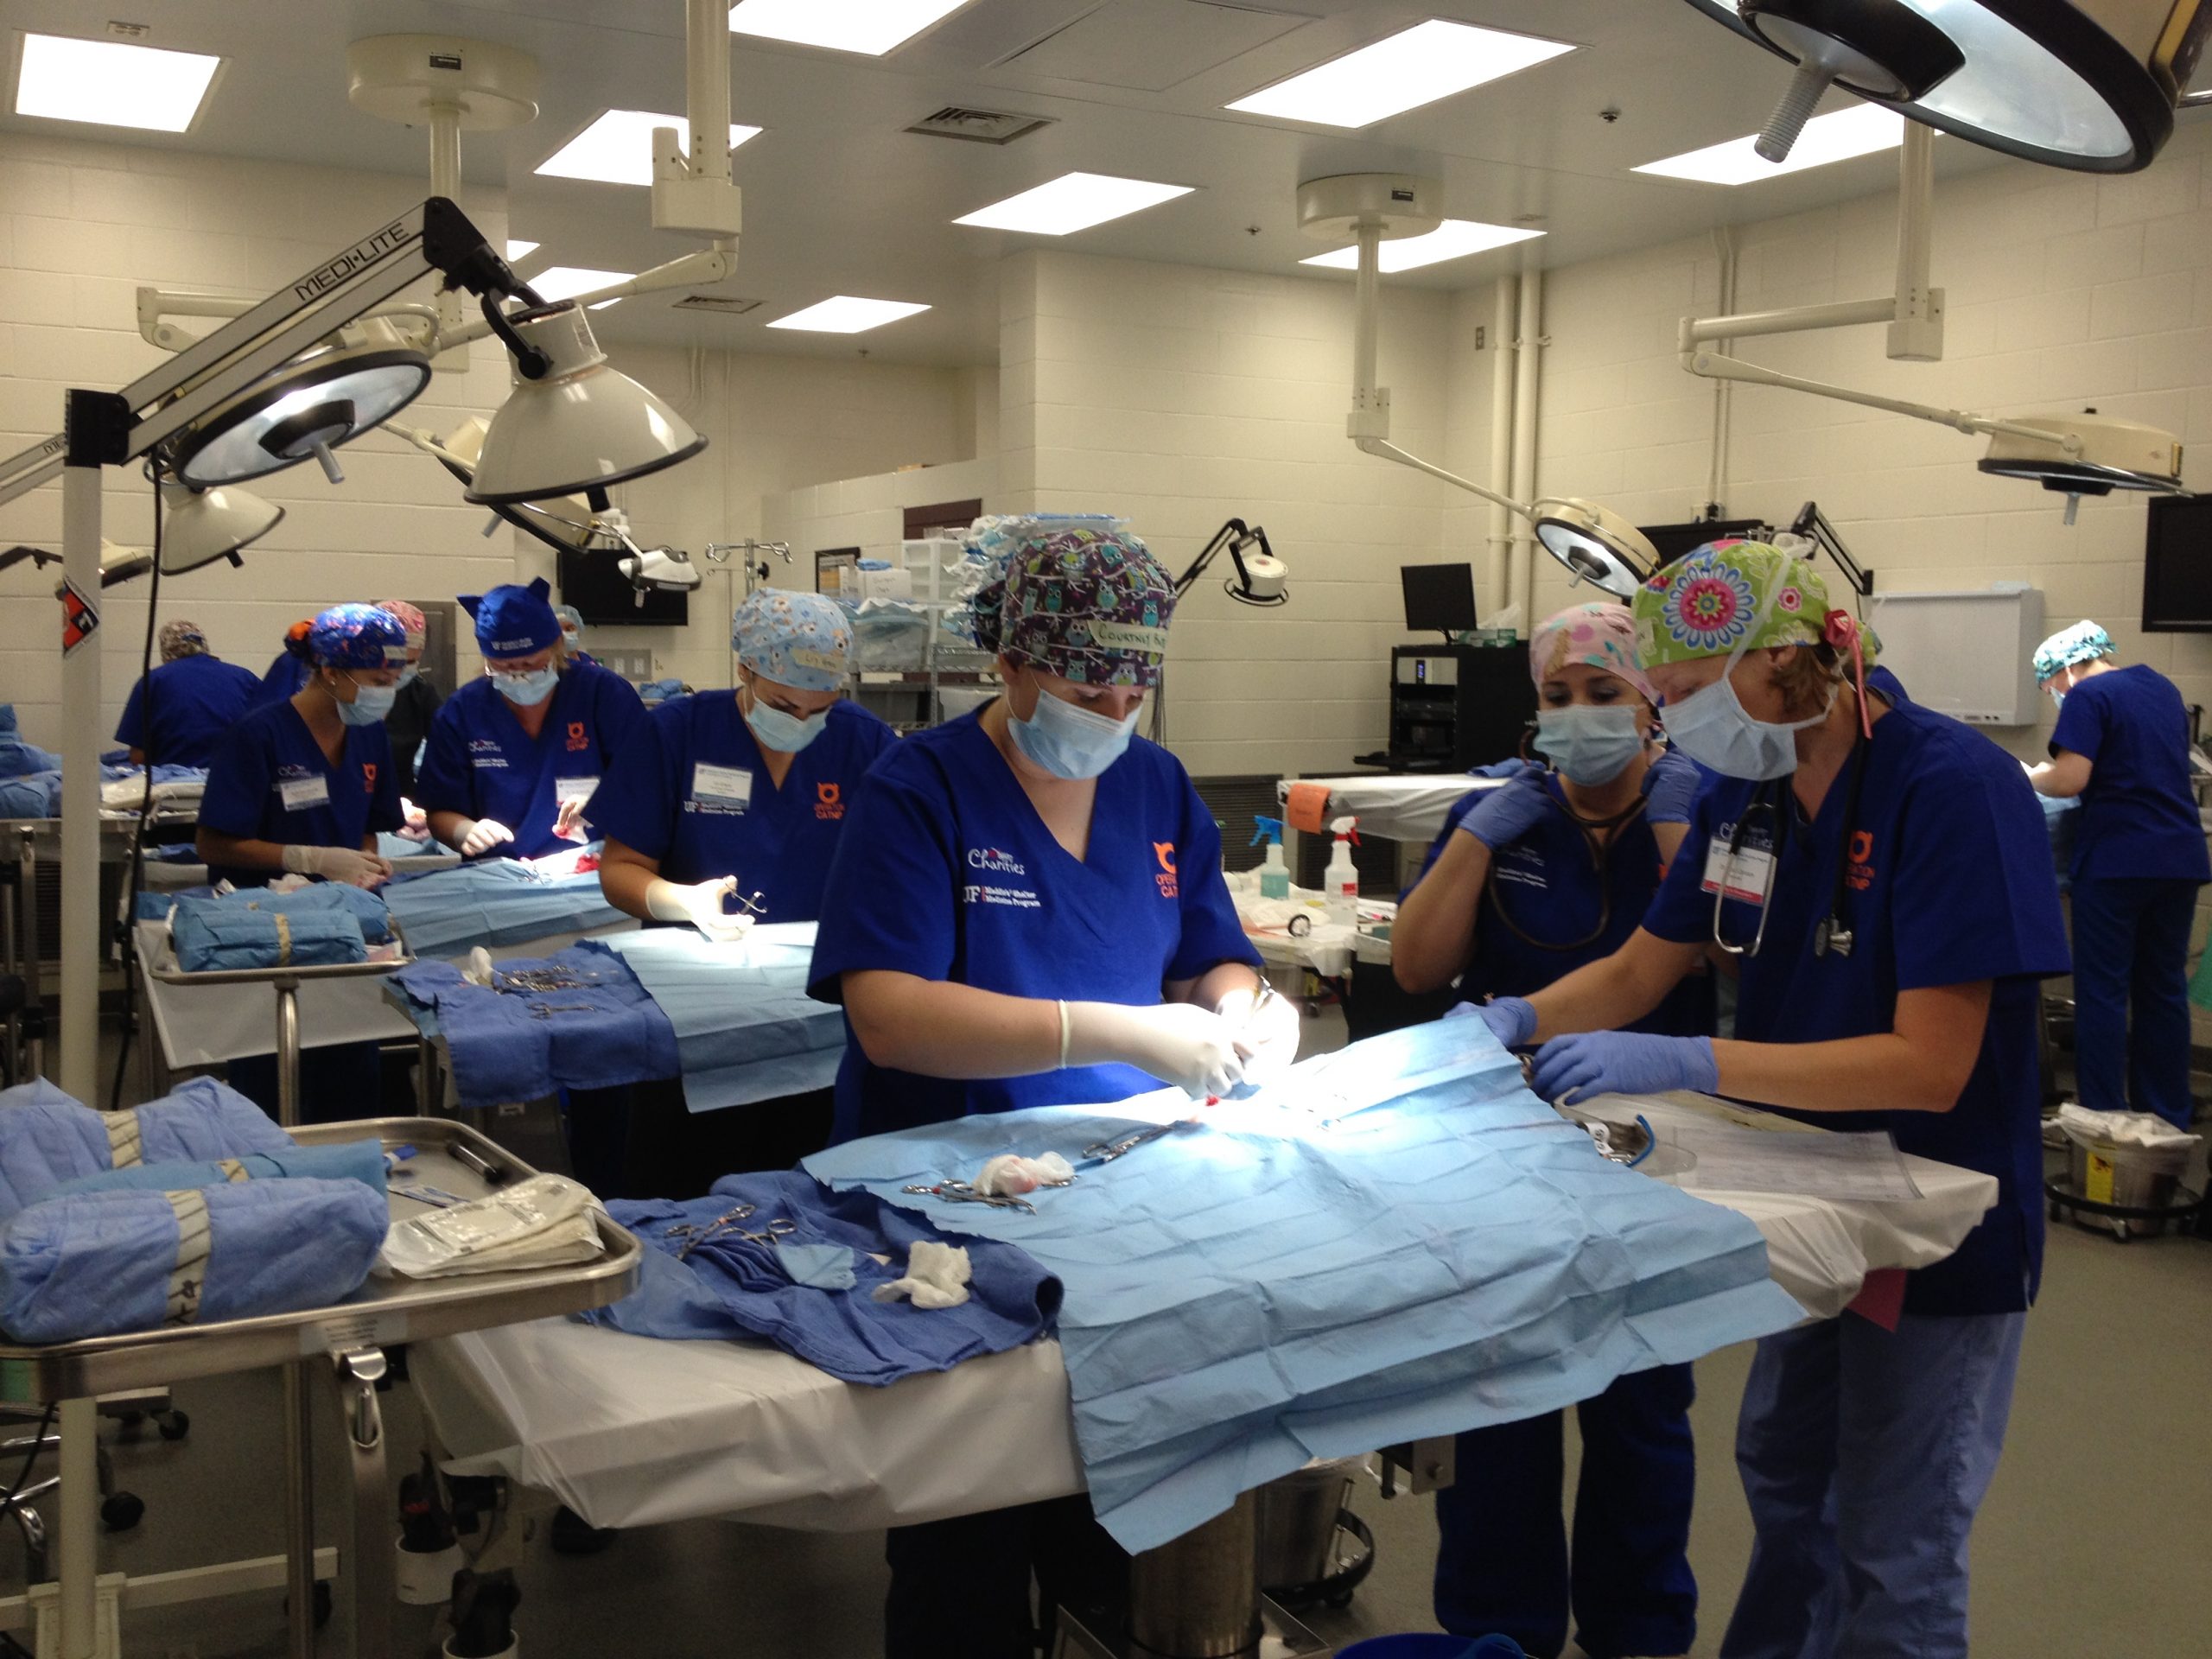 A row of surgeons in blue scrub tops perform spay surgery on cats